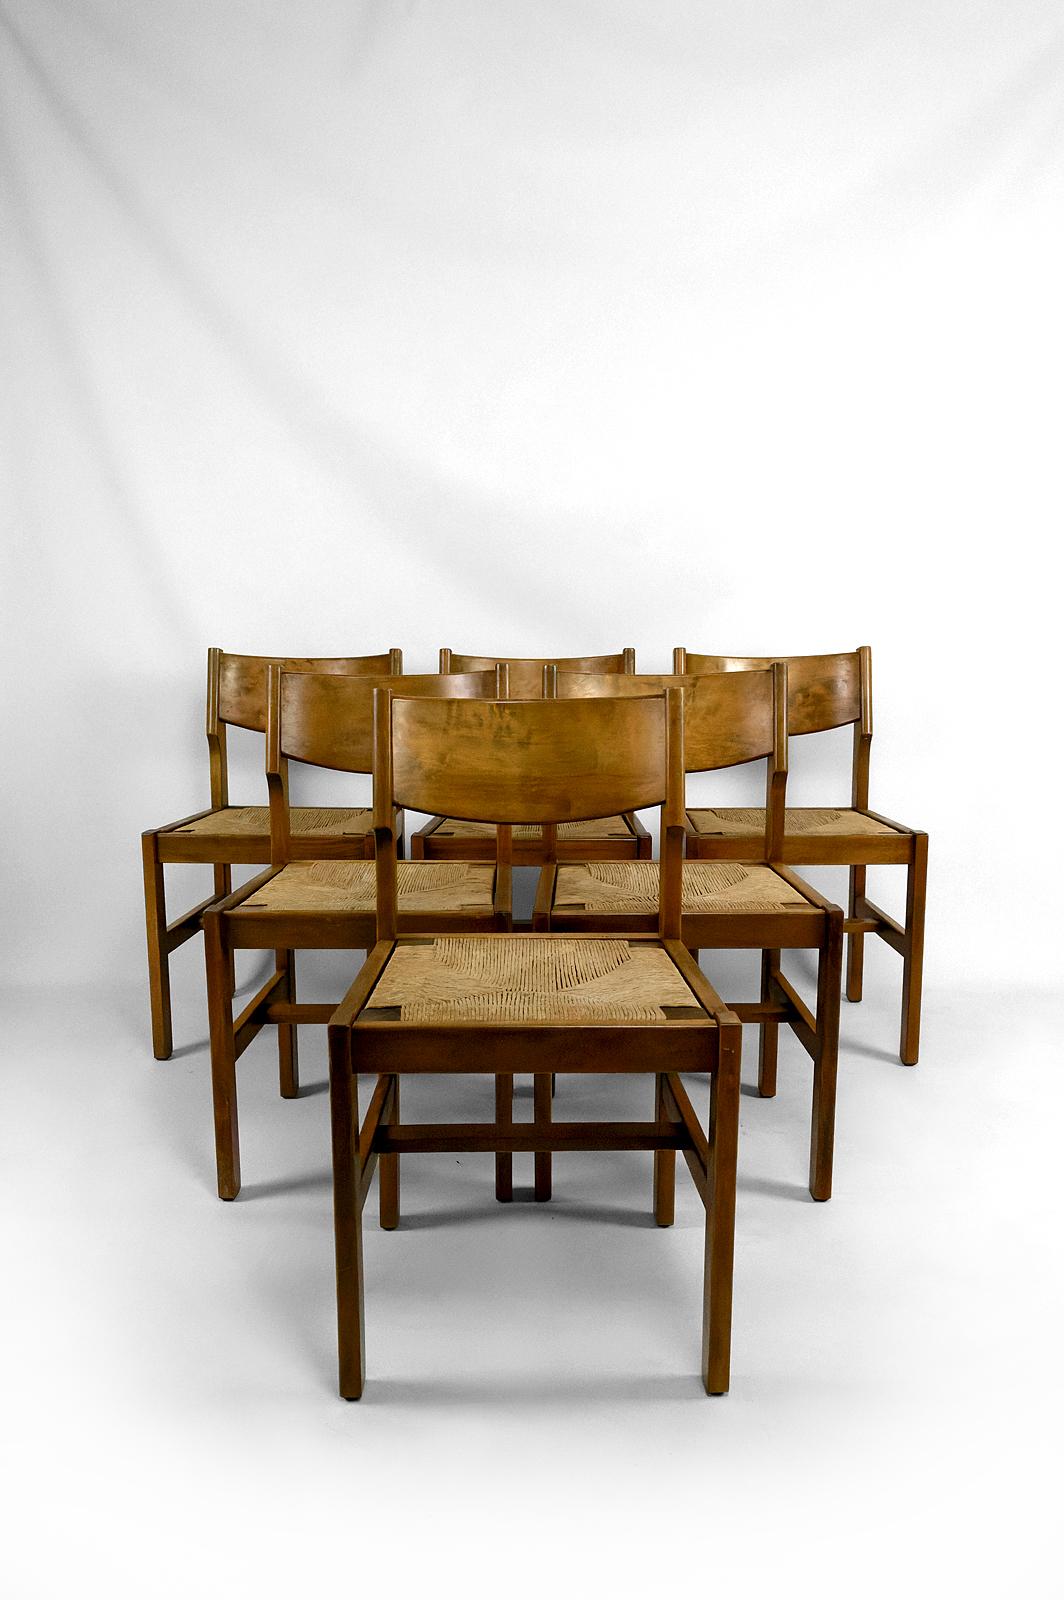 Set of 6 brutalist Elm chairs with mulched seats, Maison Regain, Circa 1960


Set of 6 dining room chairs in solid blond elm and straw-covered seats.

Brutalist / Organic Modern style, France, circa 1960-1970.

By Maison Regain.
In the style of the